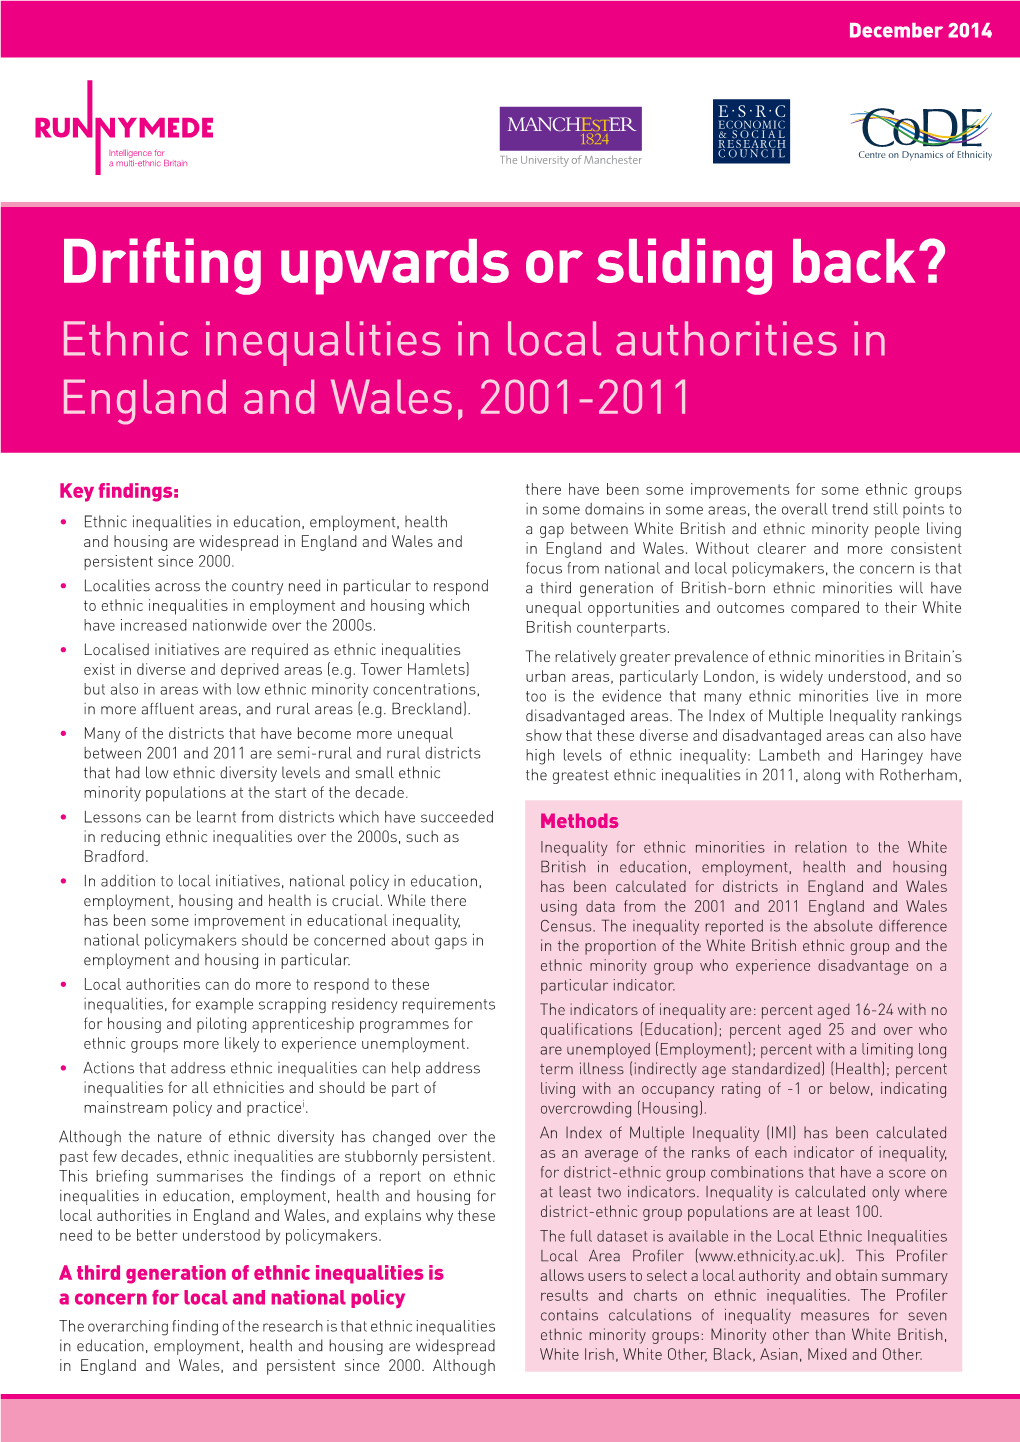 Drifting Upwards Or Sliding Back? Ethnic Inequalities in Local Authorities in England and Wales, 2001-2011